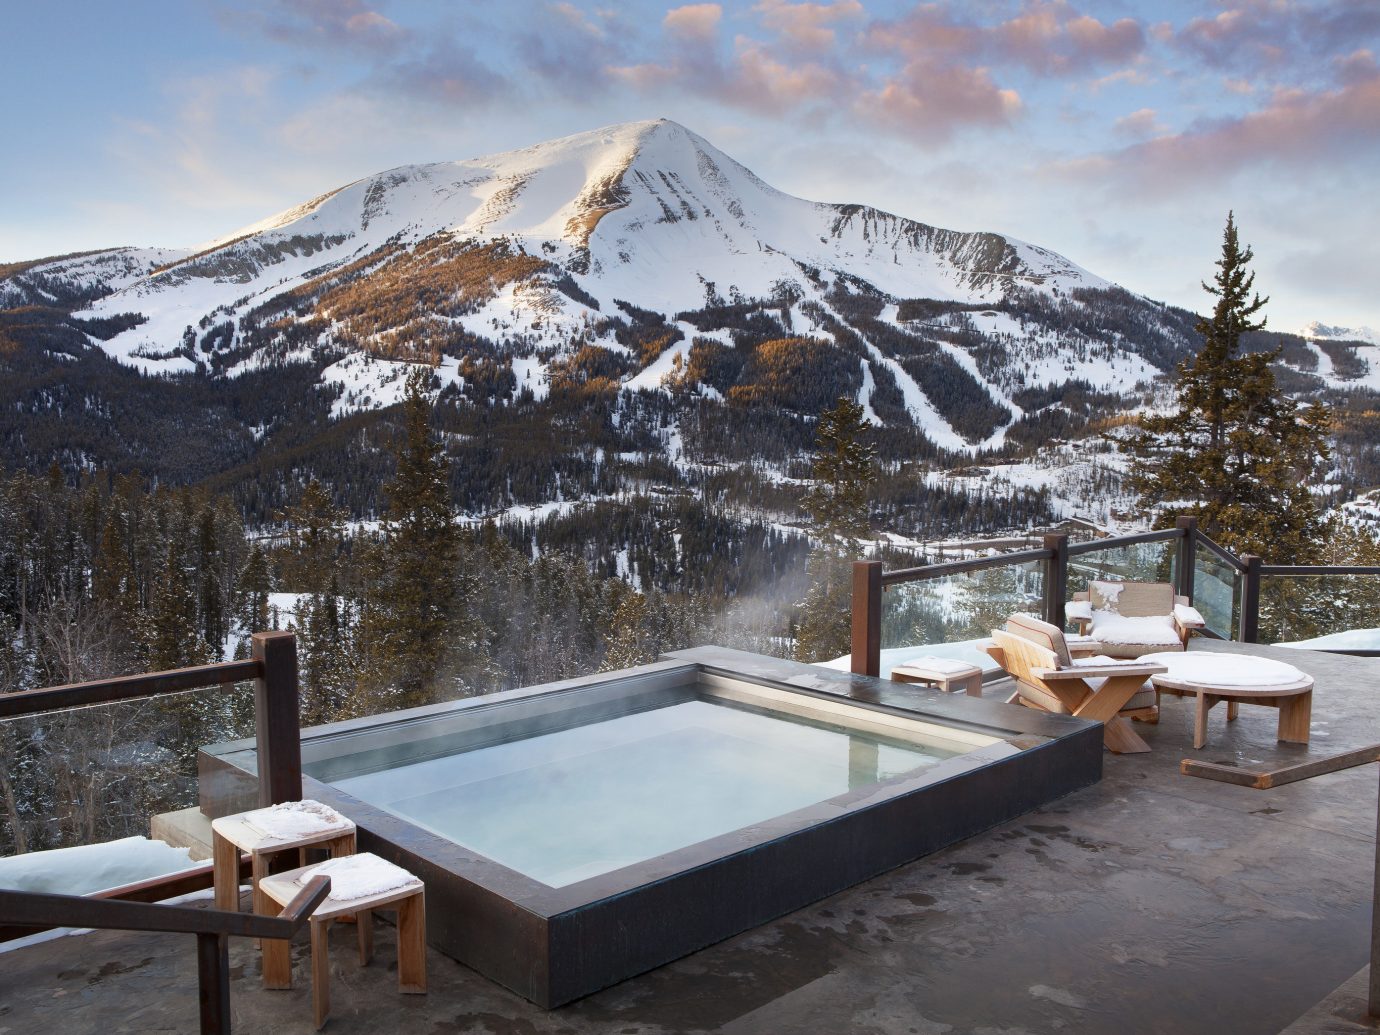 The most popular luxury ski resorts for large groups